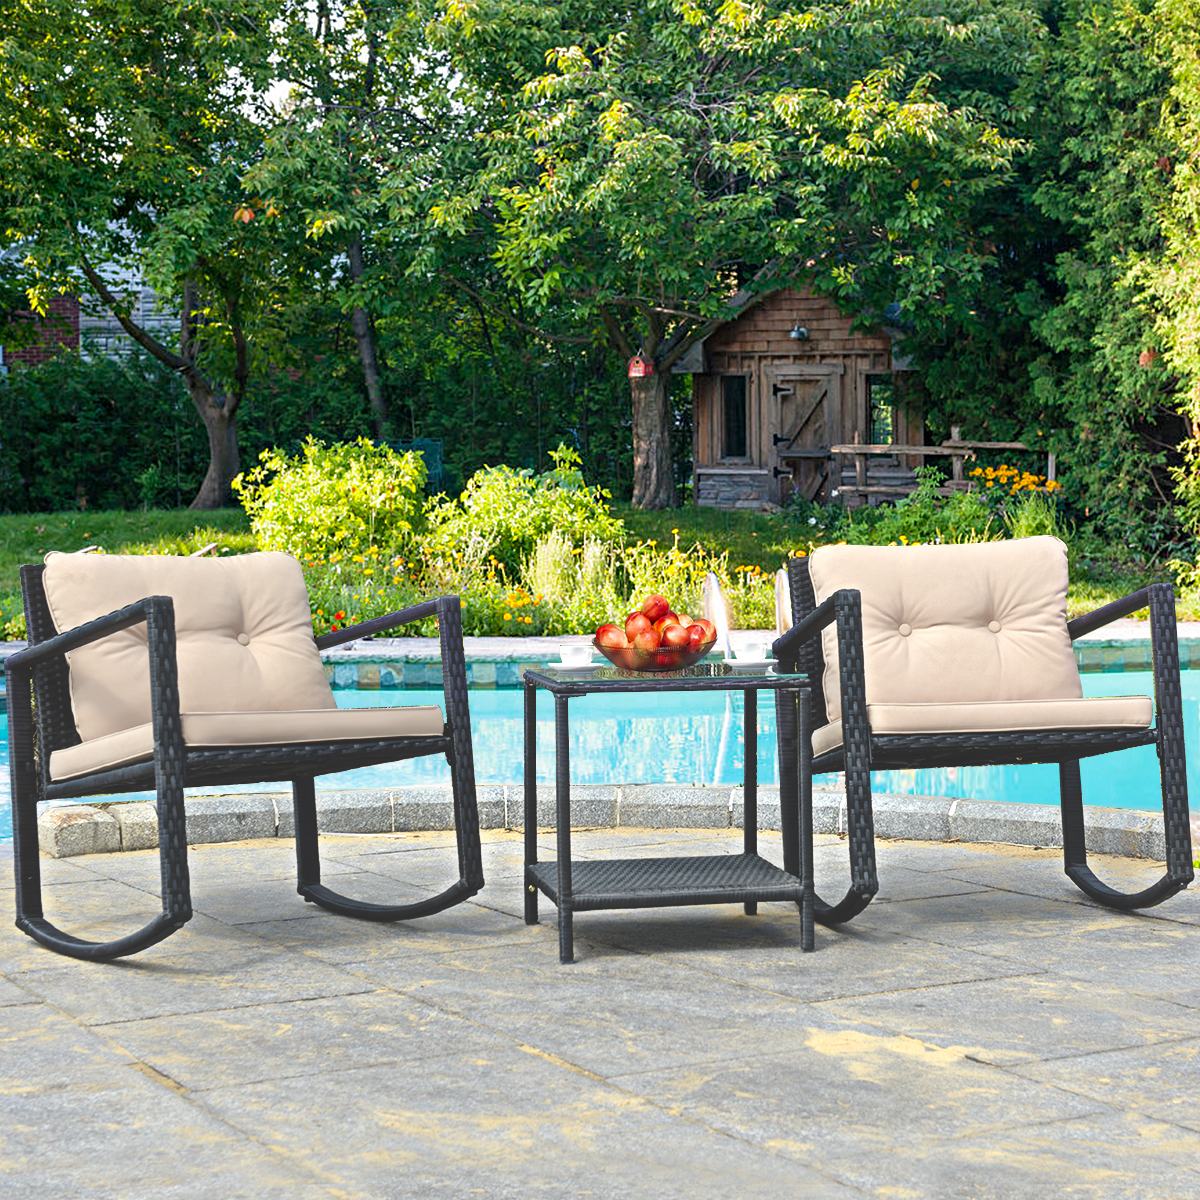 Gymax Set of 3 Rattan Rocking Chair Cushioned Sofa Unit Garden Patio Furniture - image 1 of 7